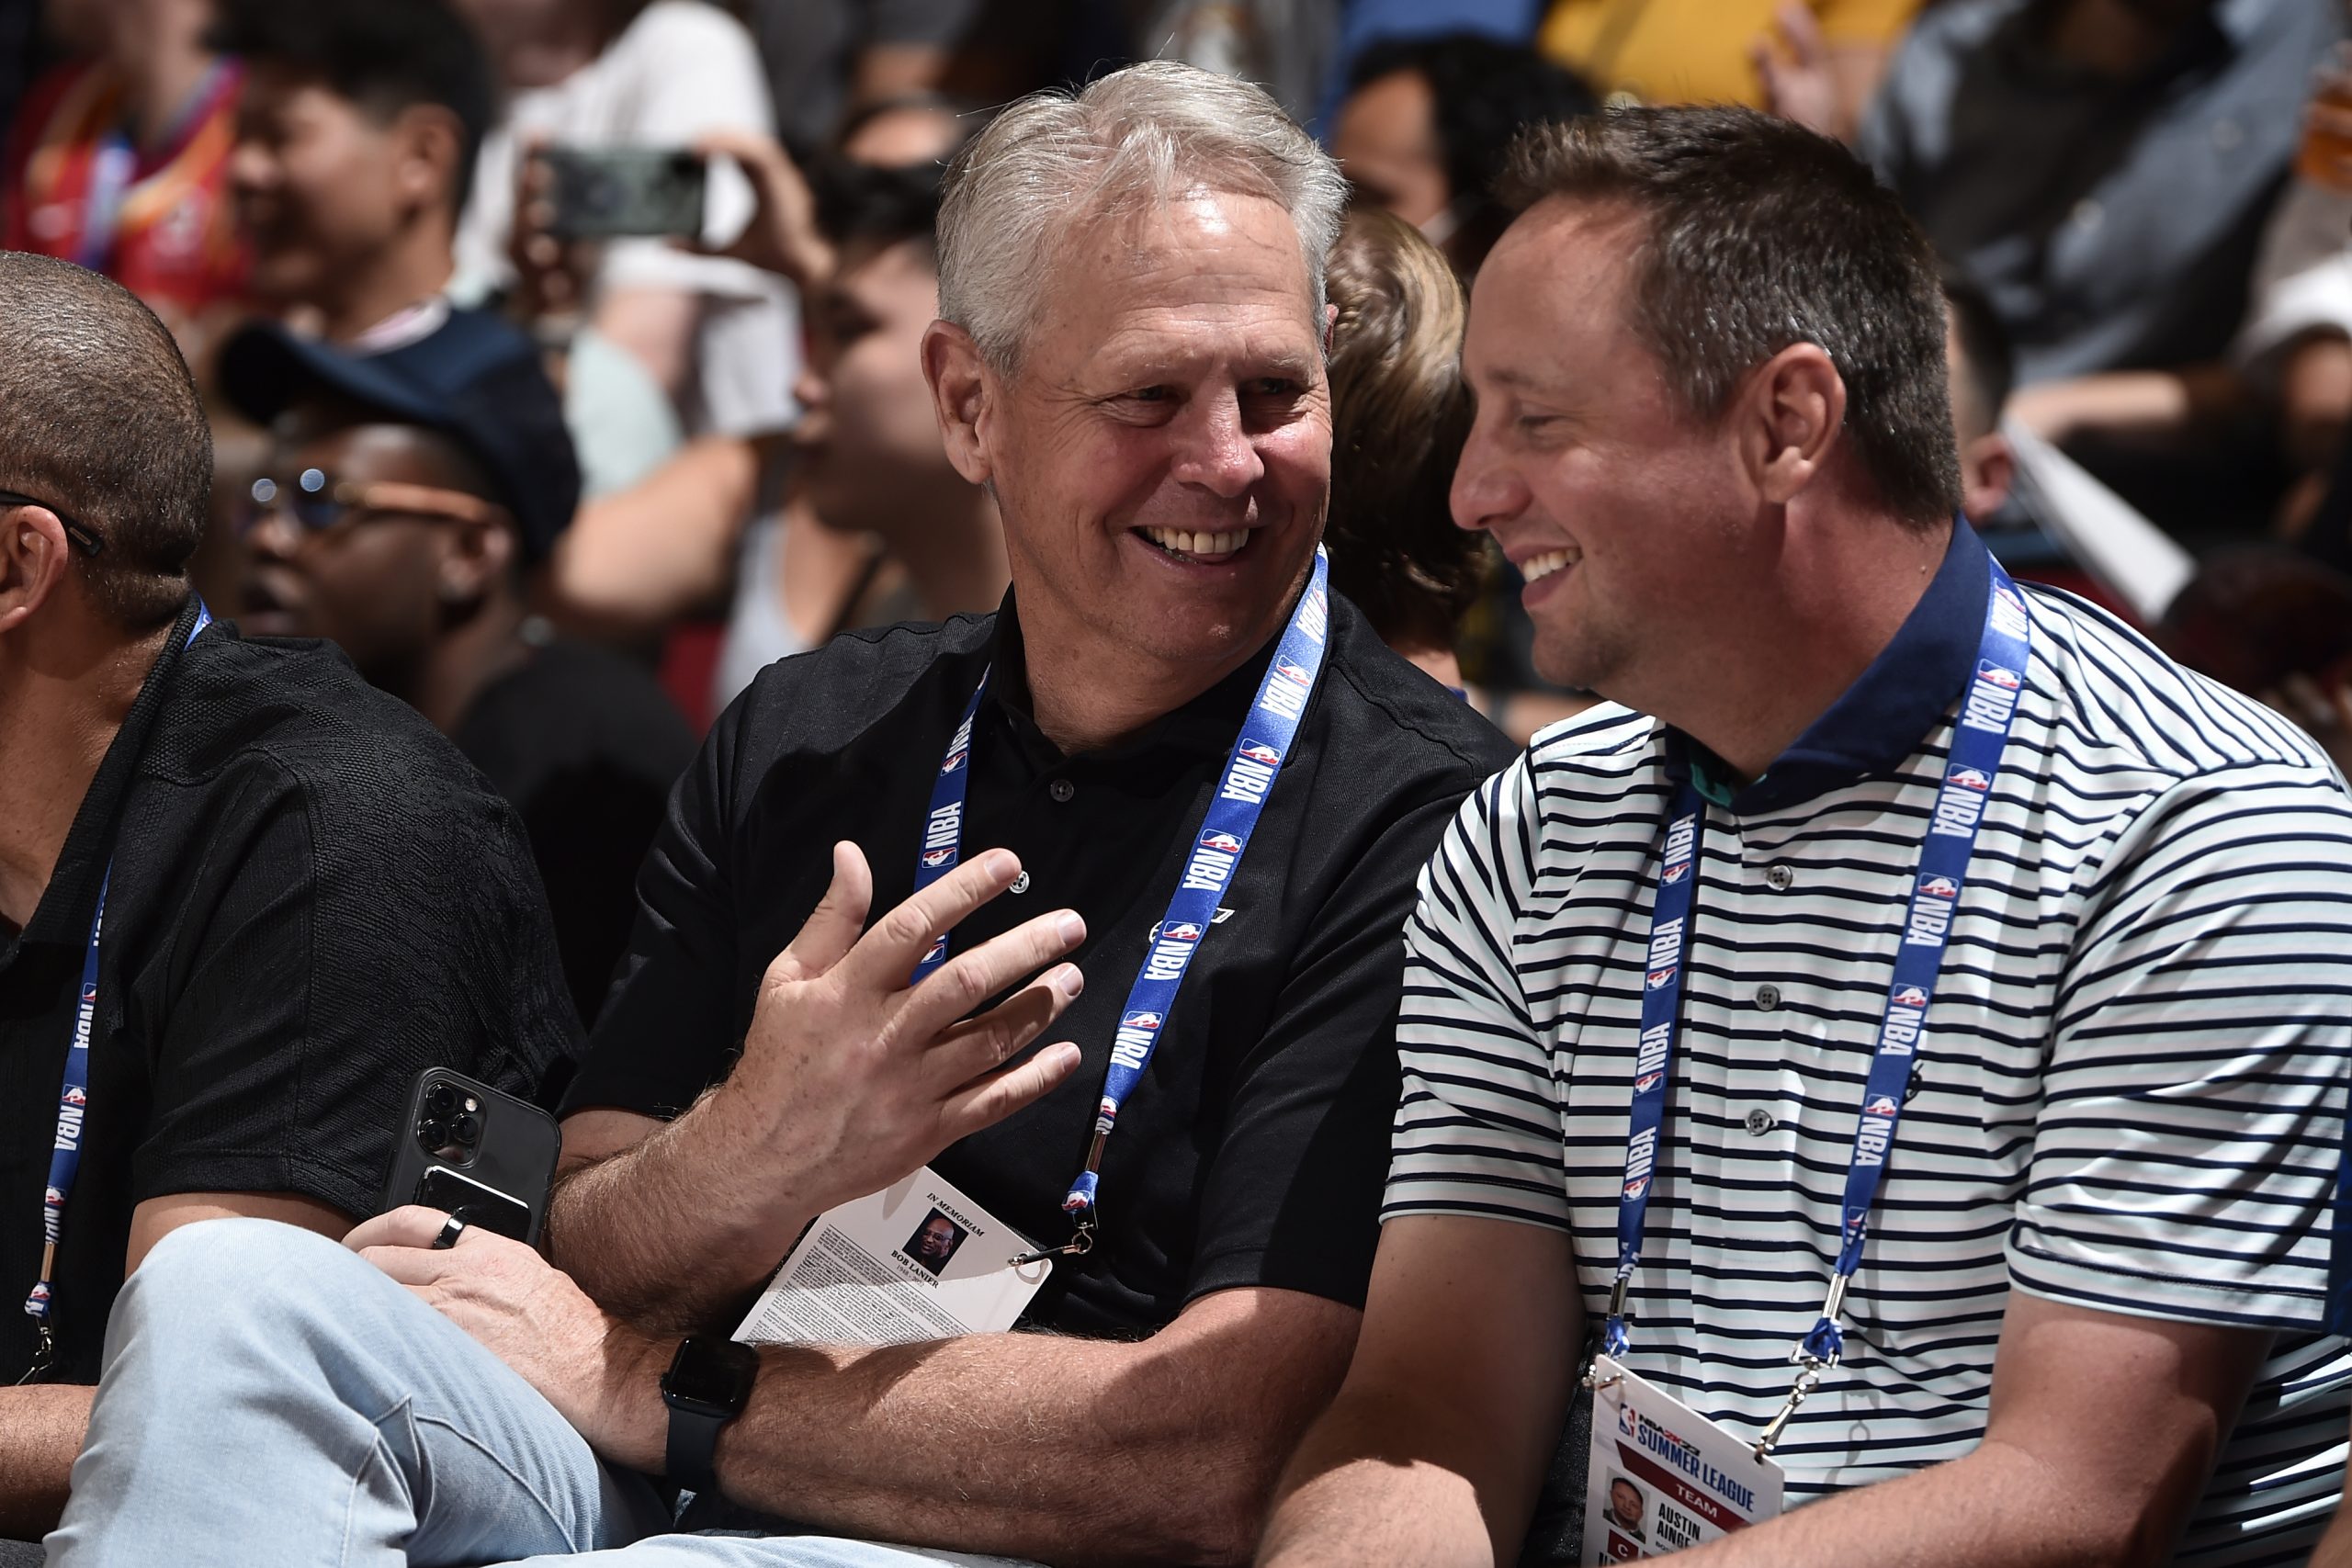 Jazz CEO Danny Ainge on Offseason Moves: ‘We Needed to Transition Our Roster’